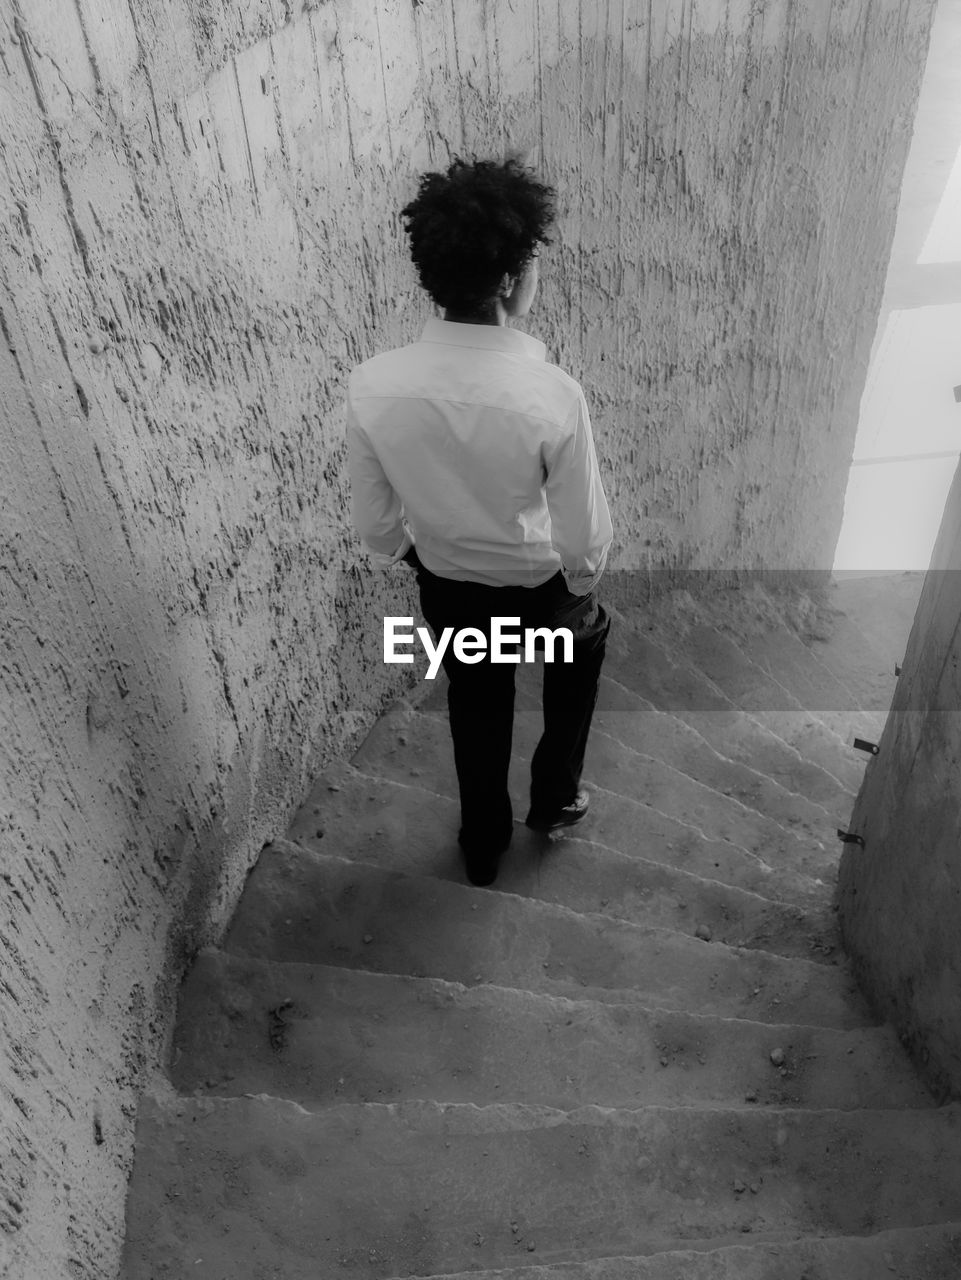 white, black, one person, full length, black and white, architecture, rear view, wall - building feature, monochrome, monochrome photography, staircase, casual clothing, standing, built structure, adult, snapshot, lifestyles, leisure activity, men, women, day, steps and staircases, wall, walking, indoors, young adult, shadow